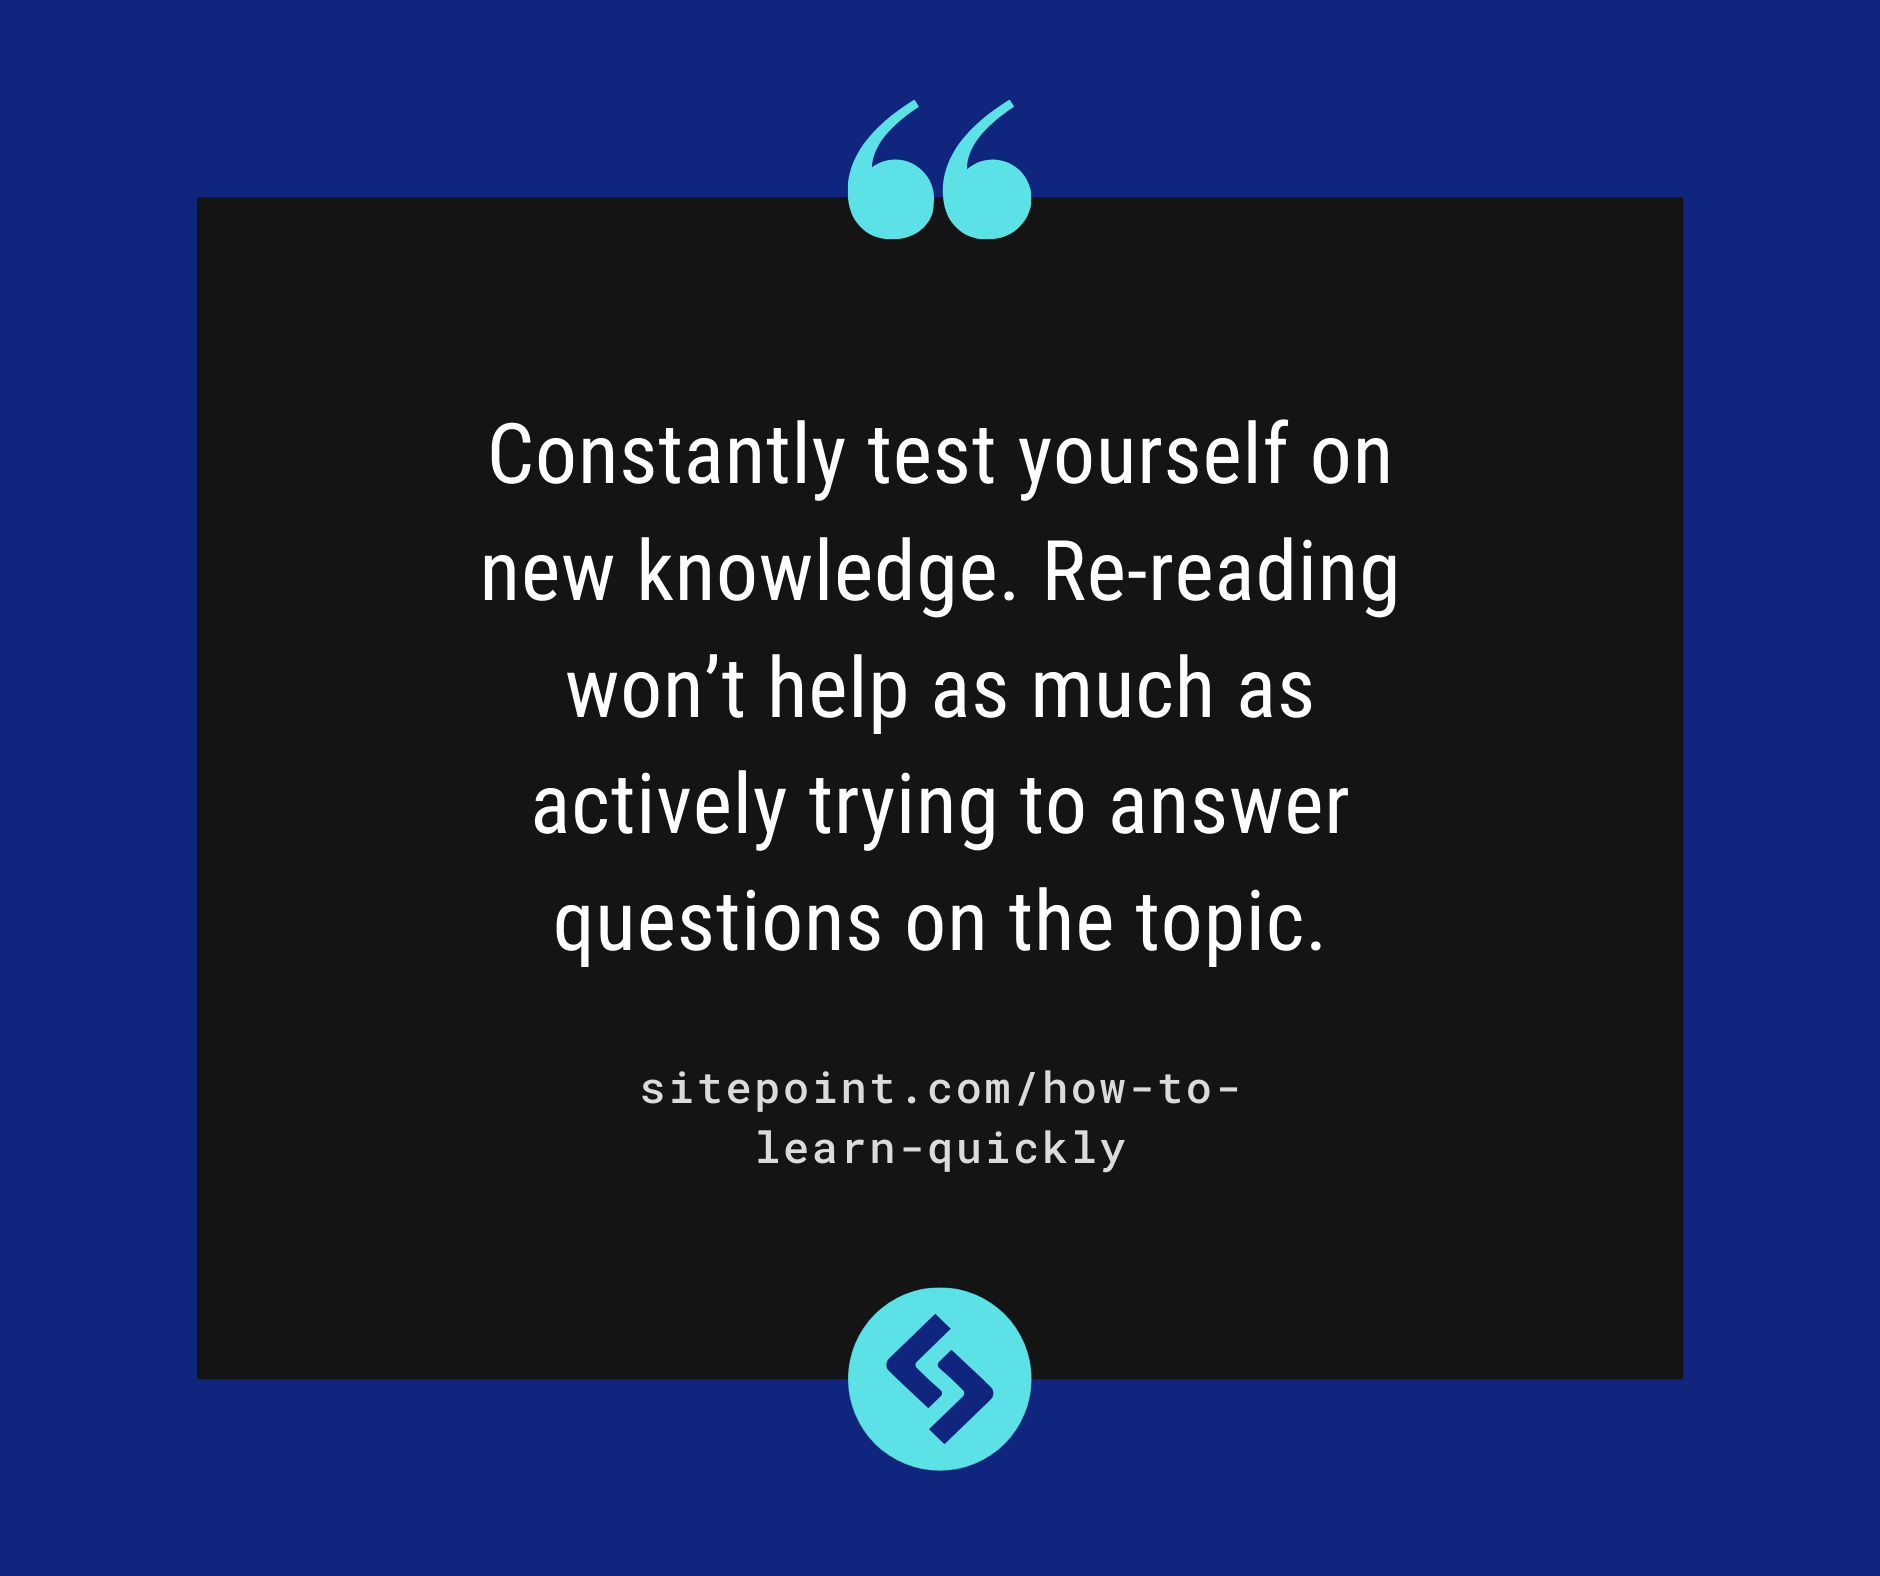 Constantly test yourself on new knowledge. Re-reading won’t help as much as actively trying to answer questions on the topic.